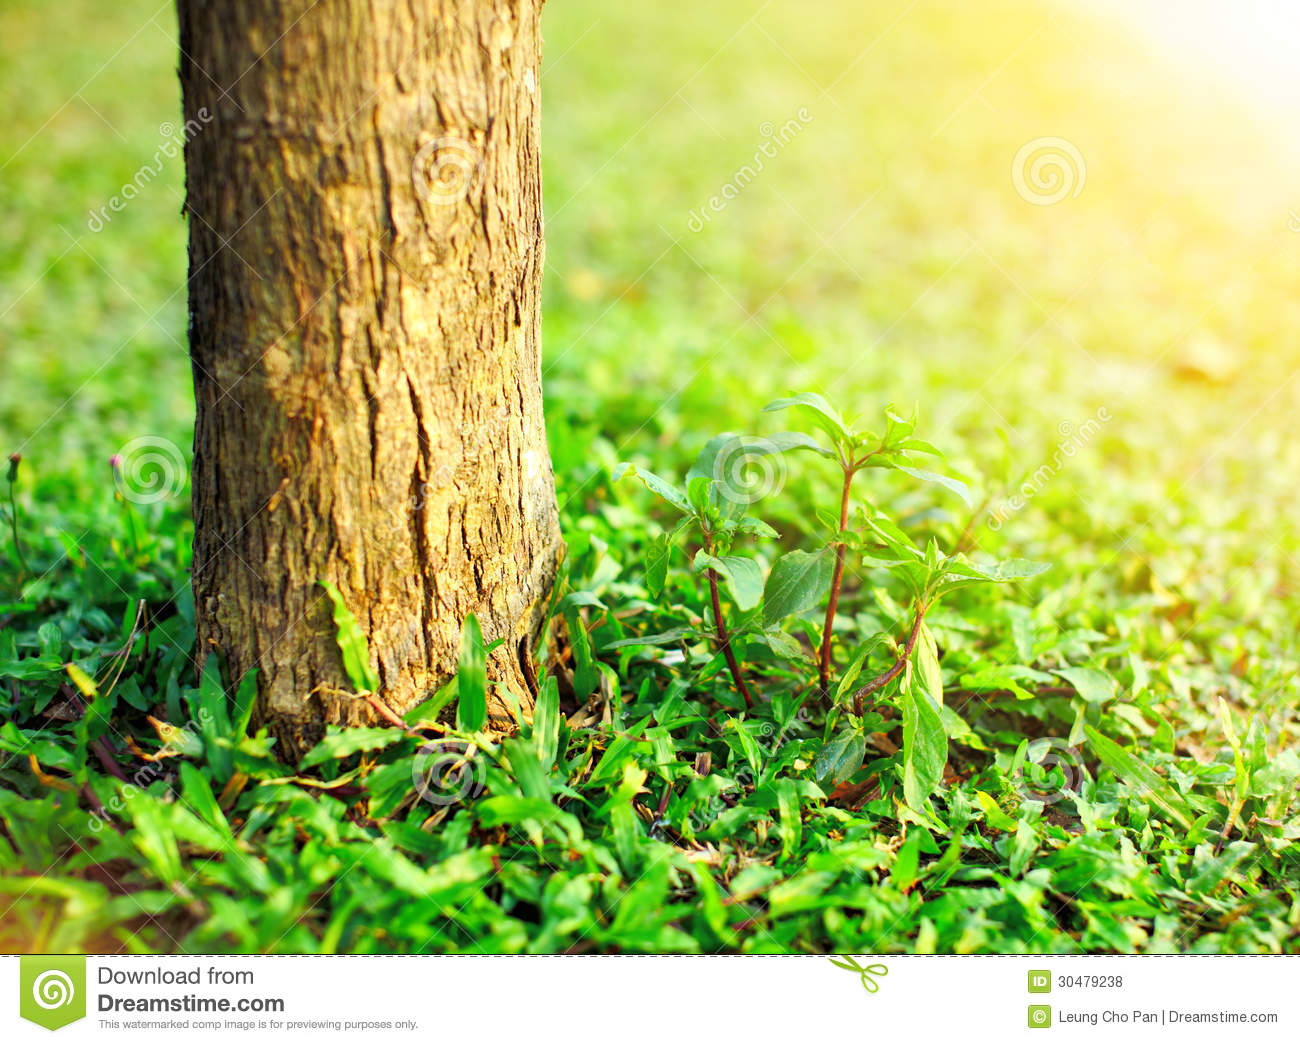 Stock Photos of Trees and Plants